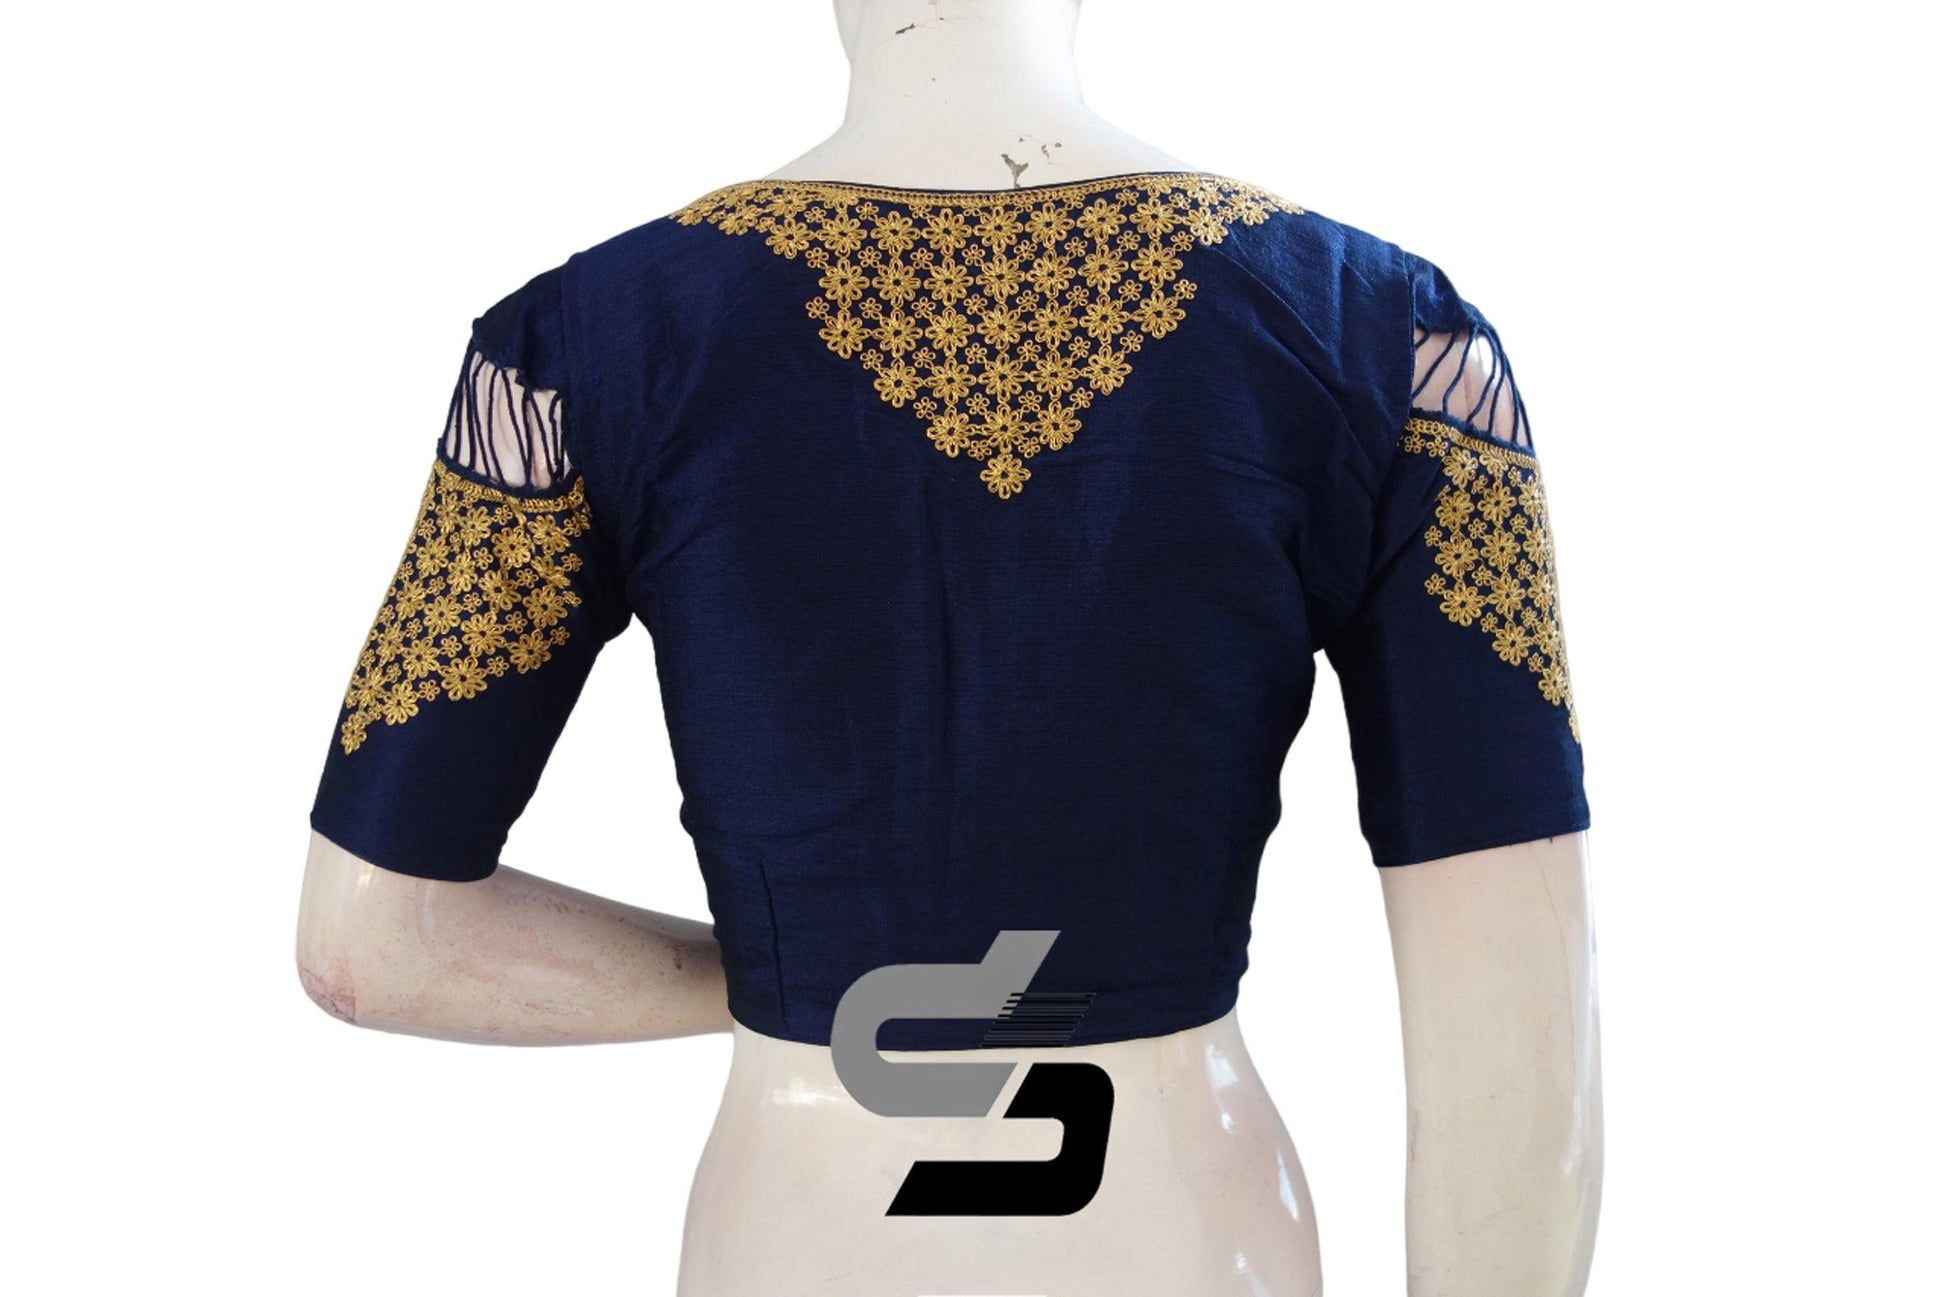 "Mesmerizing Beauty:Navy Blue High Neck Readymade Saree Blouses with Silk Embroidery" - D3blouses